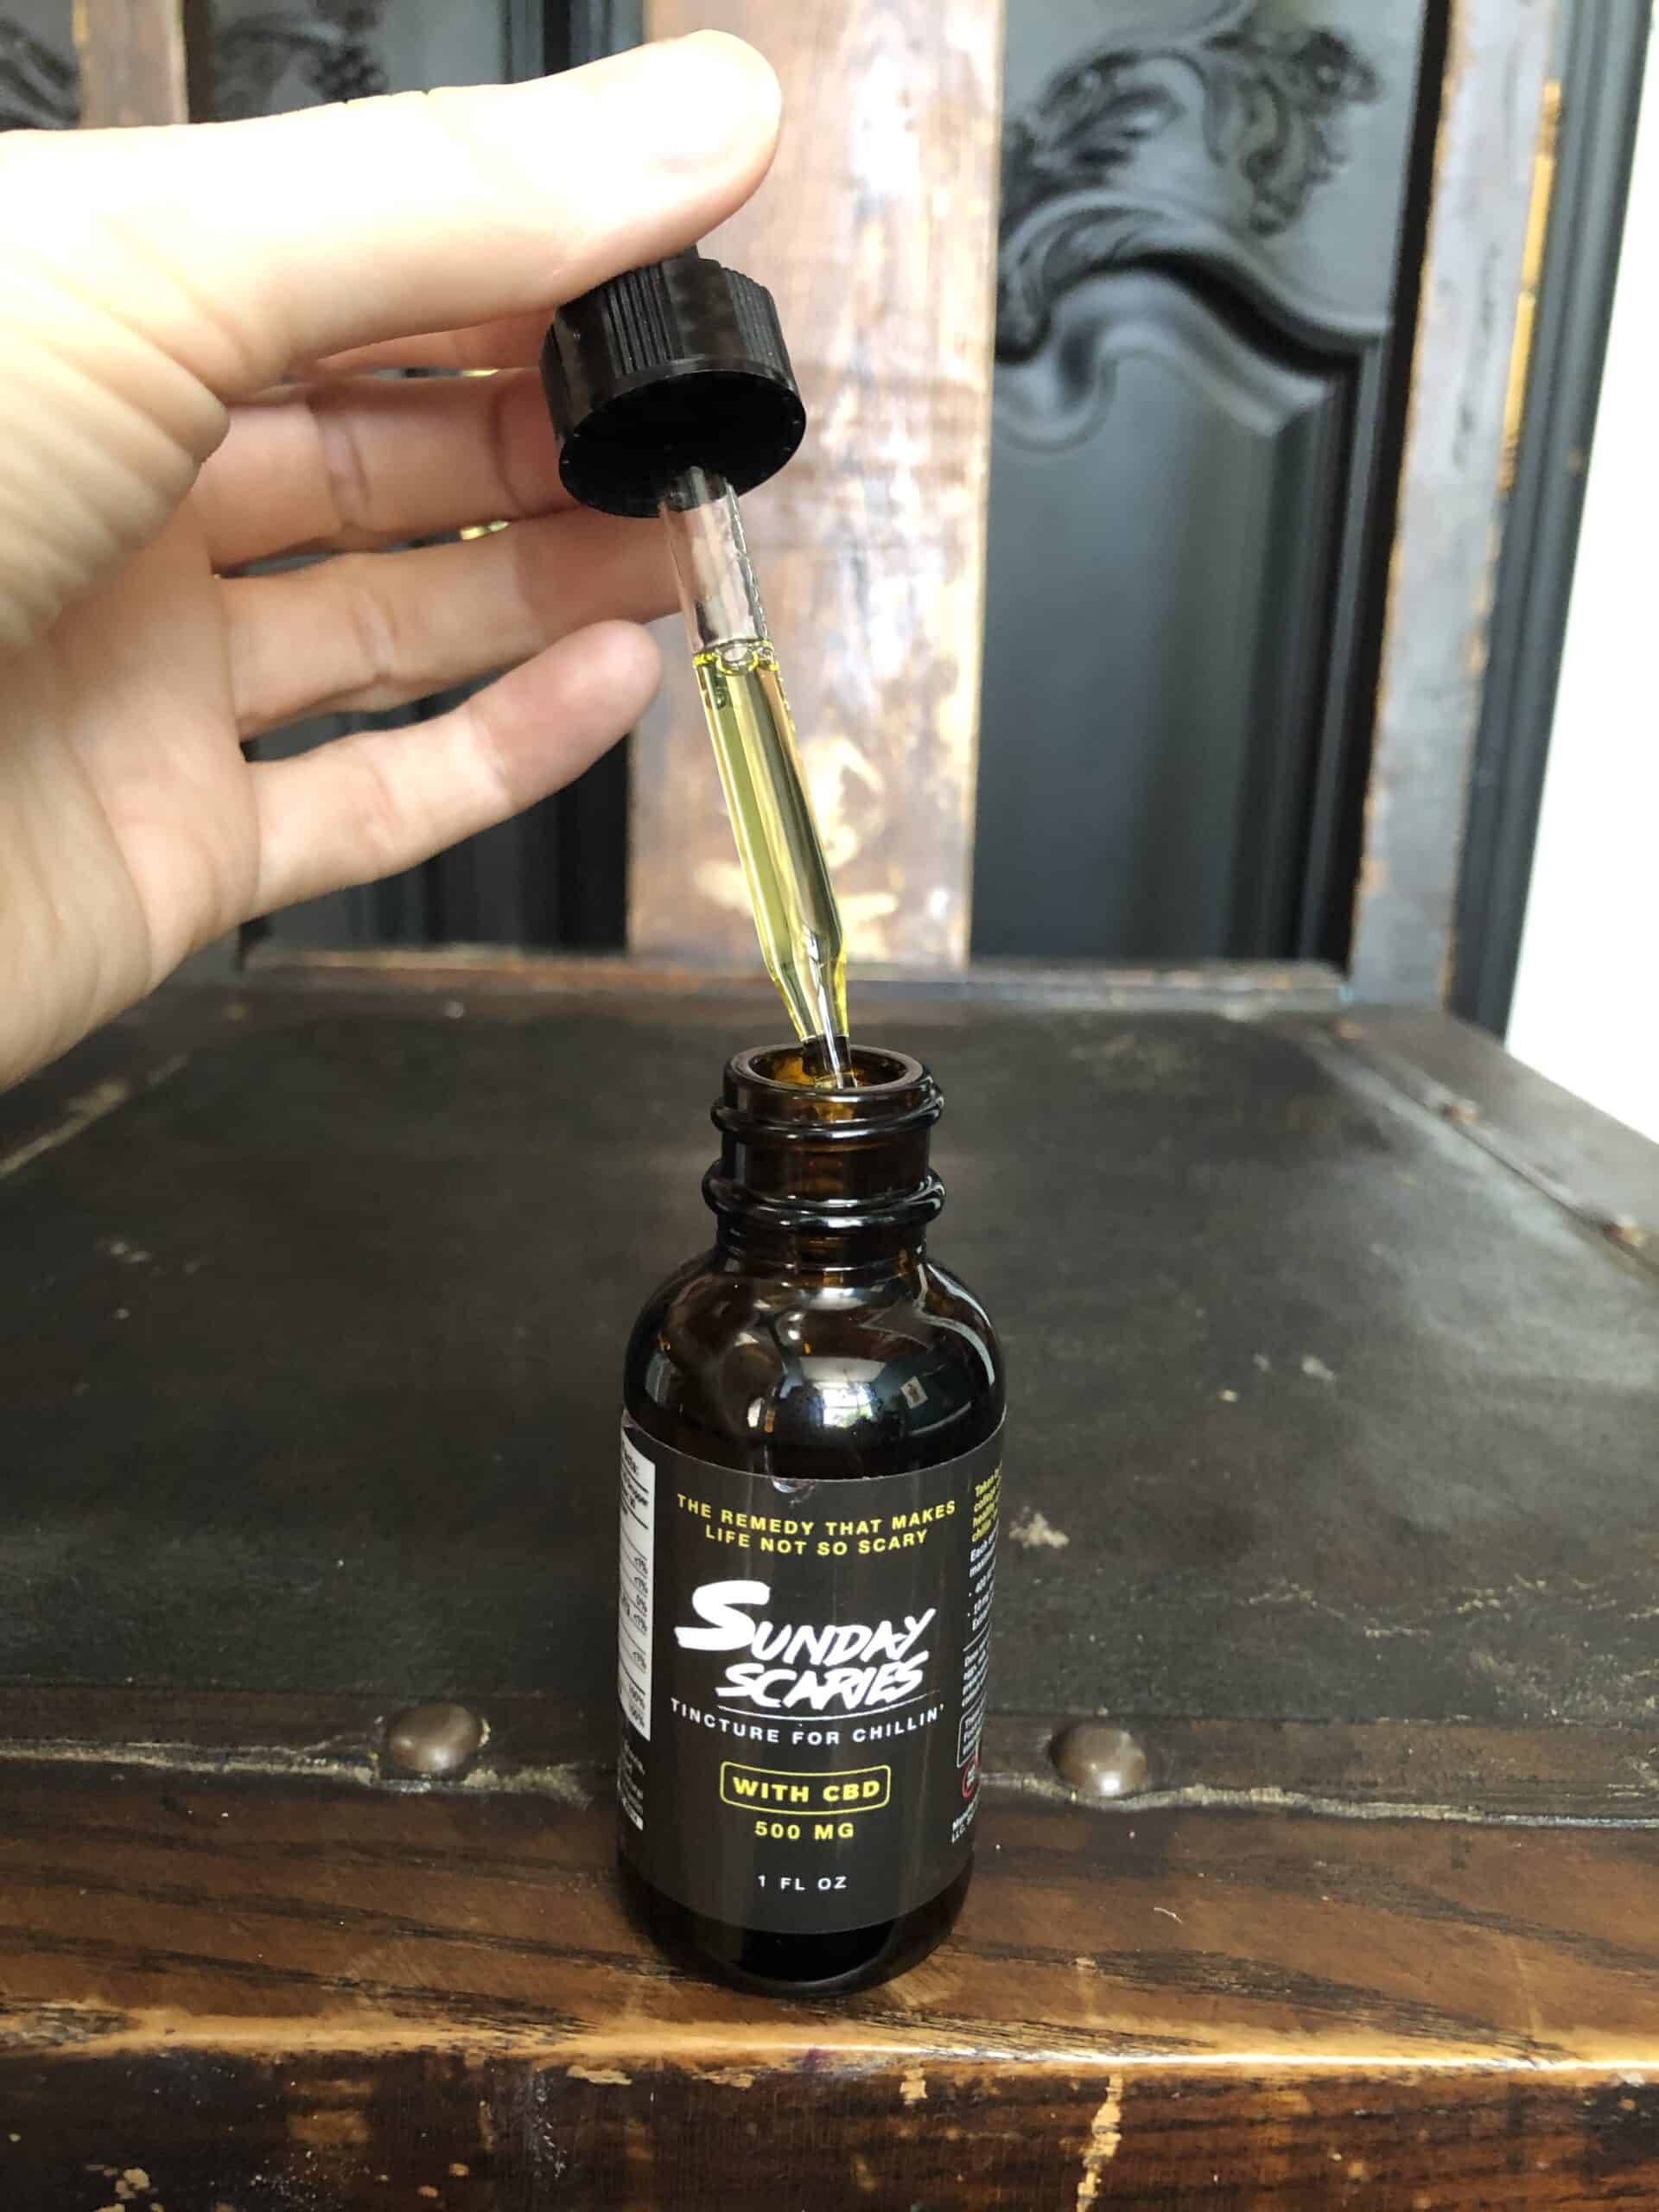 Sunday Scaries CBD Oil Tincture Save On Cannabis Review Beauty Shot